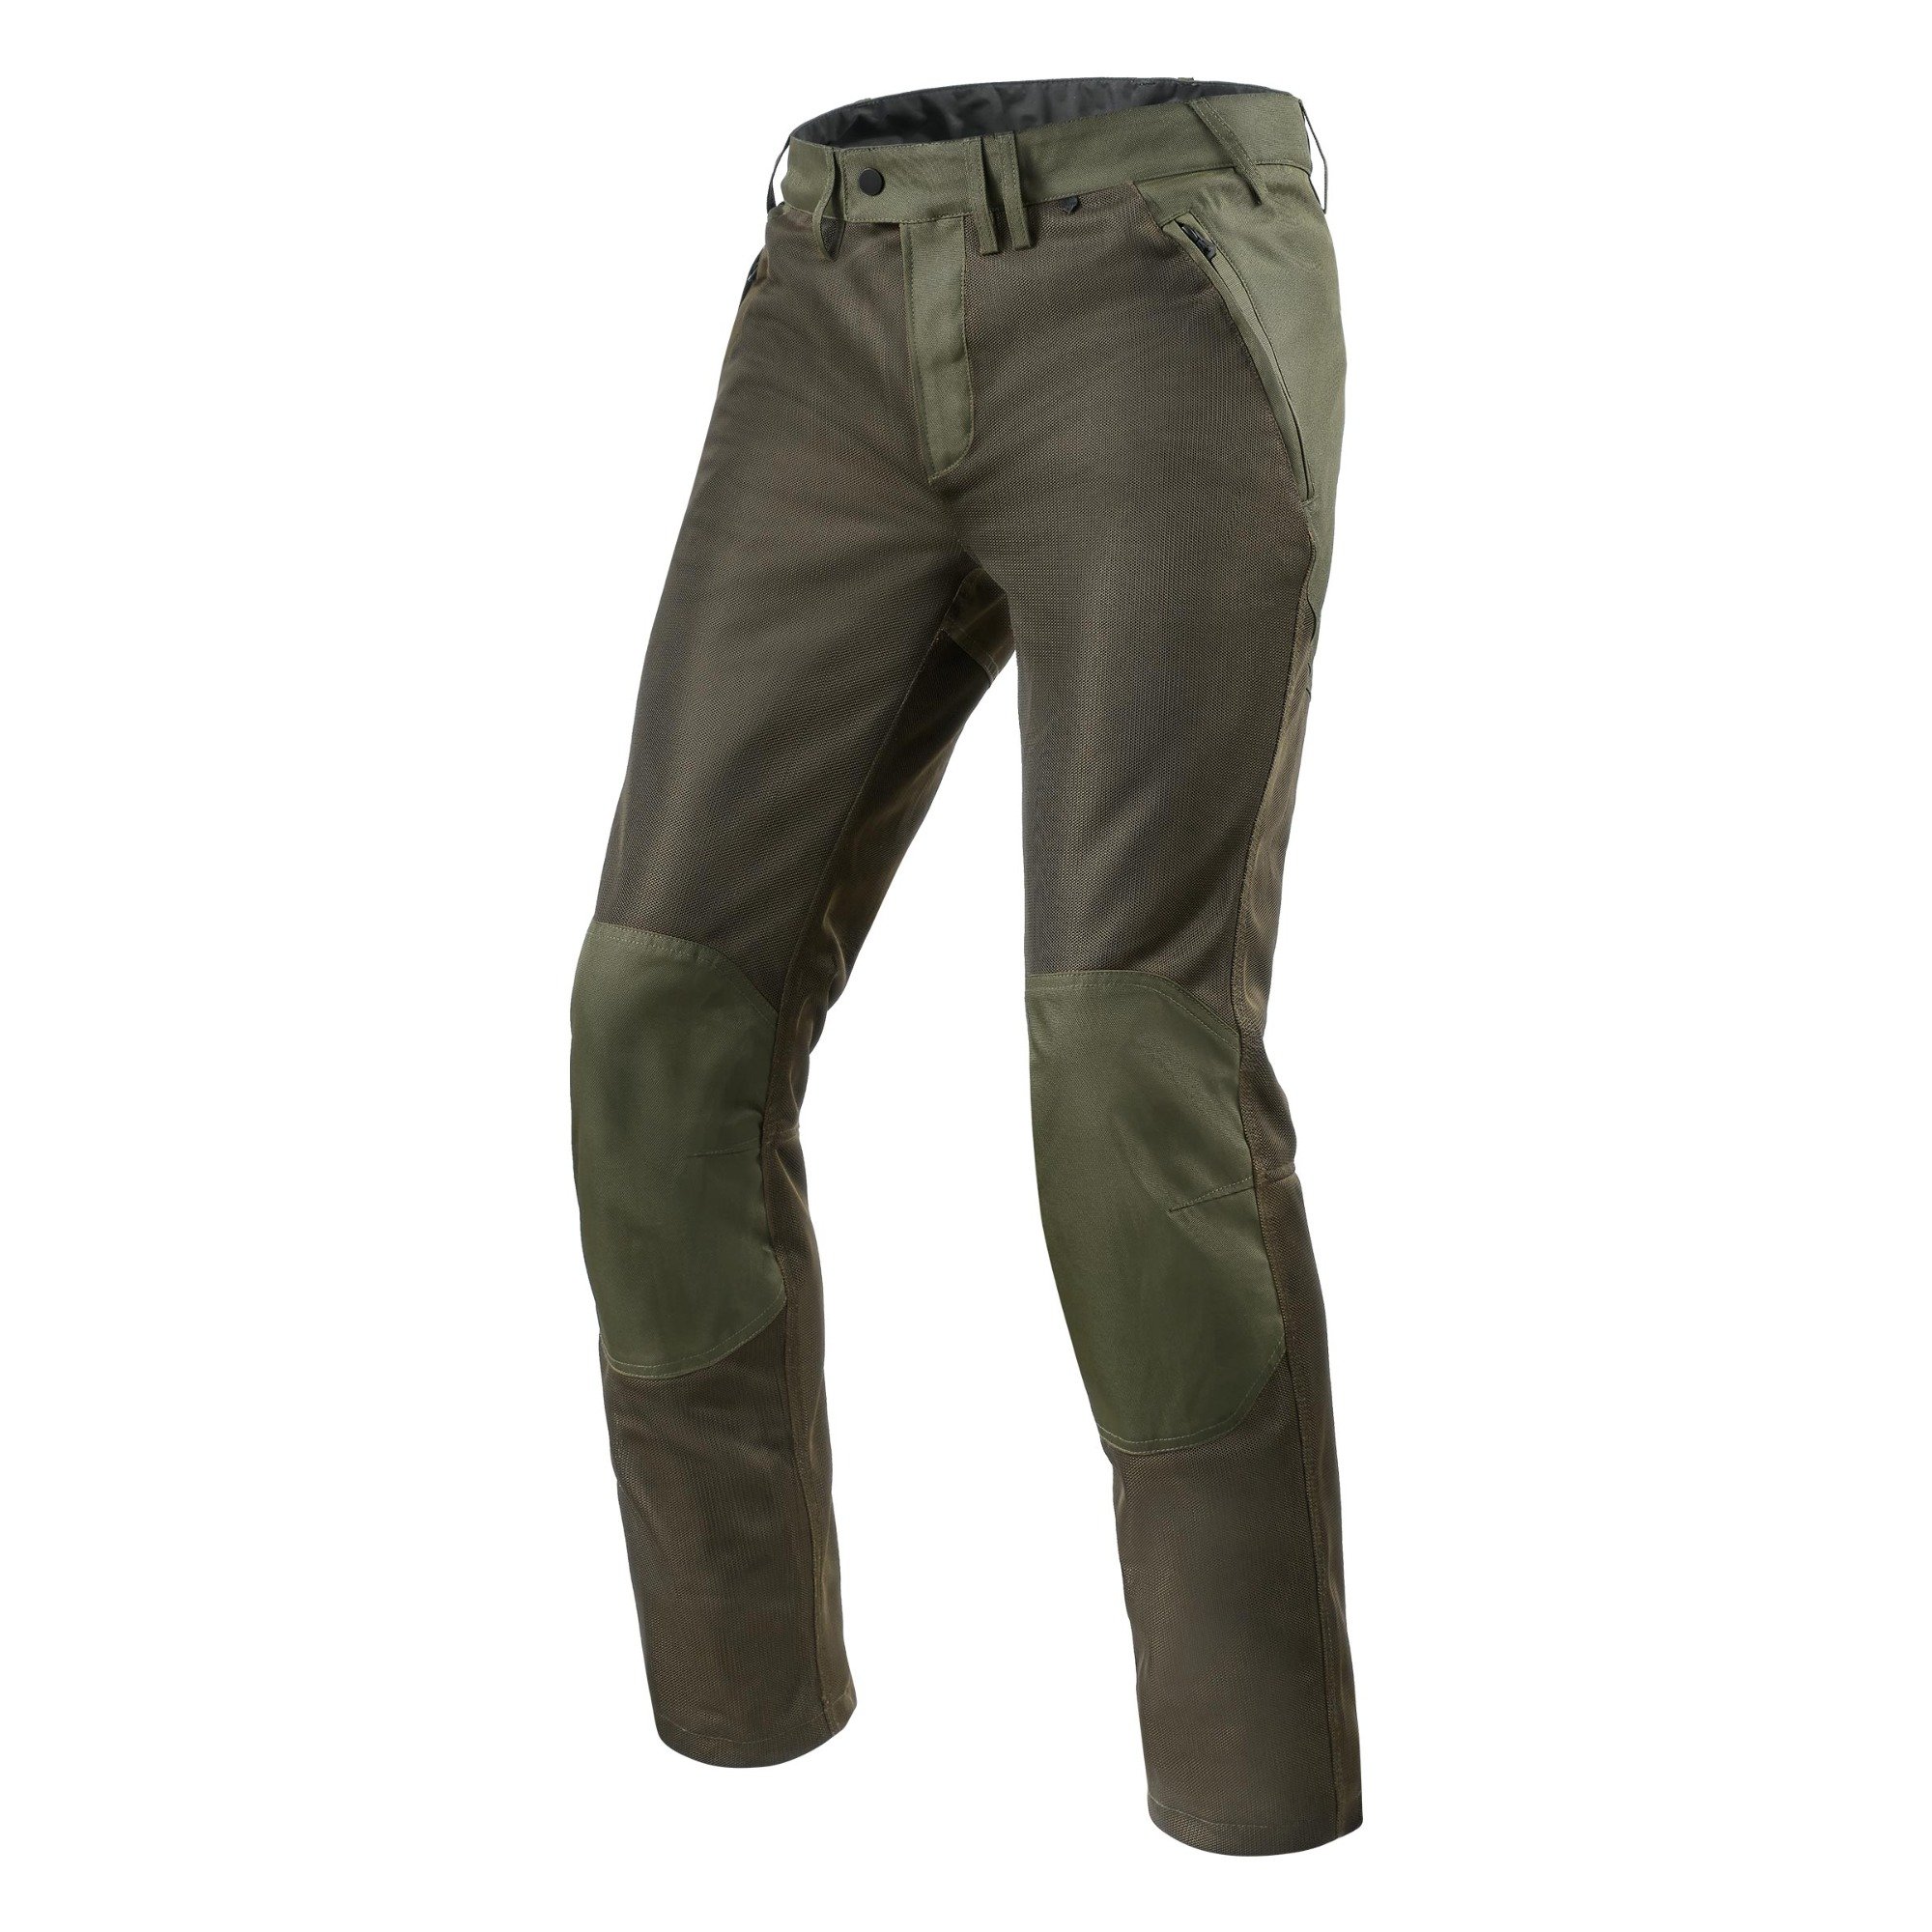 Image of REV'IT! Trousers Eclipse Dark Green Short Size M ID 8700001334990